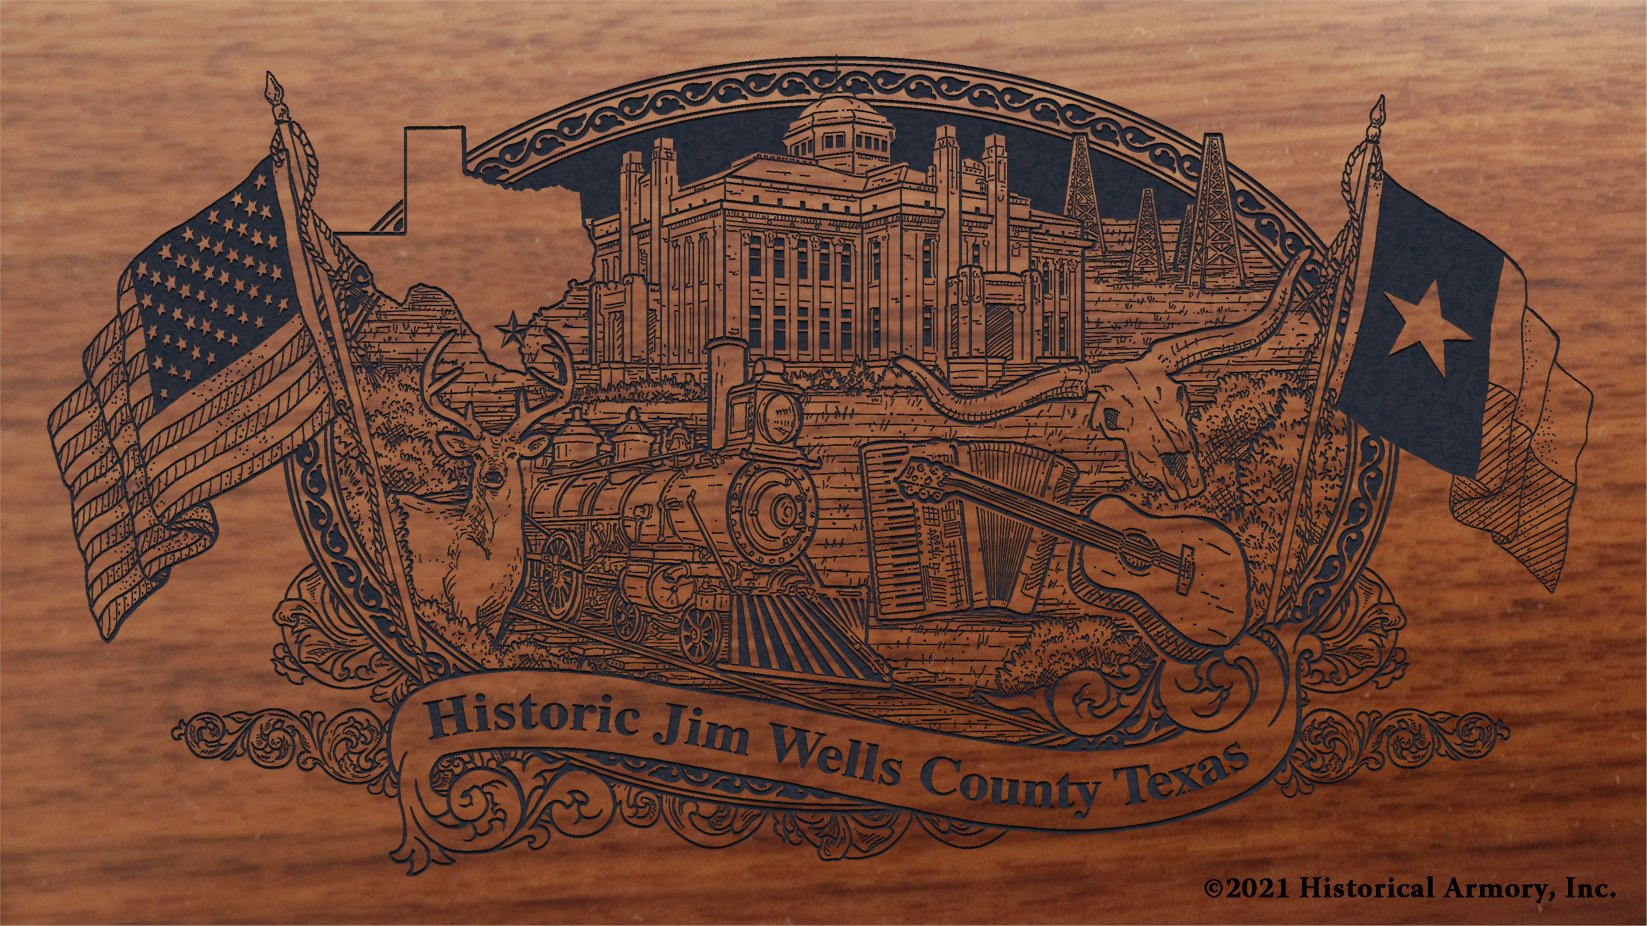 Engraved artwork | History of Jim Wells County Texas | Historical Armory